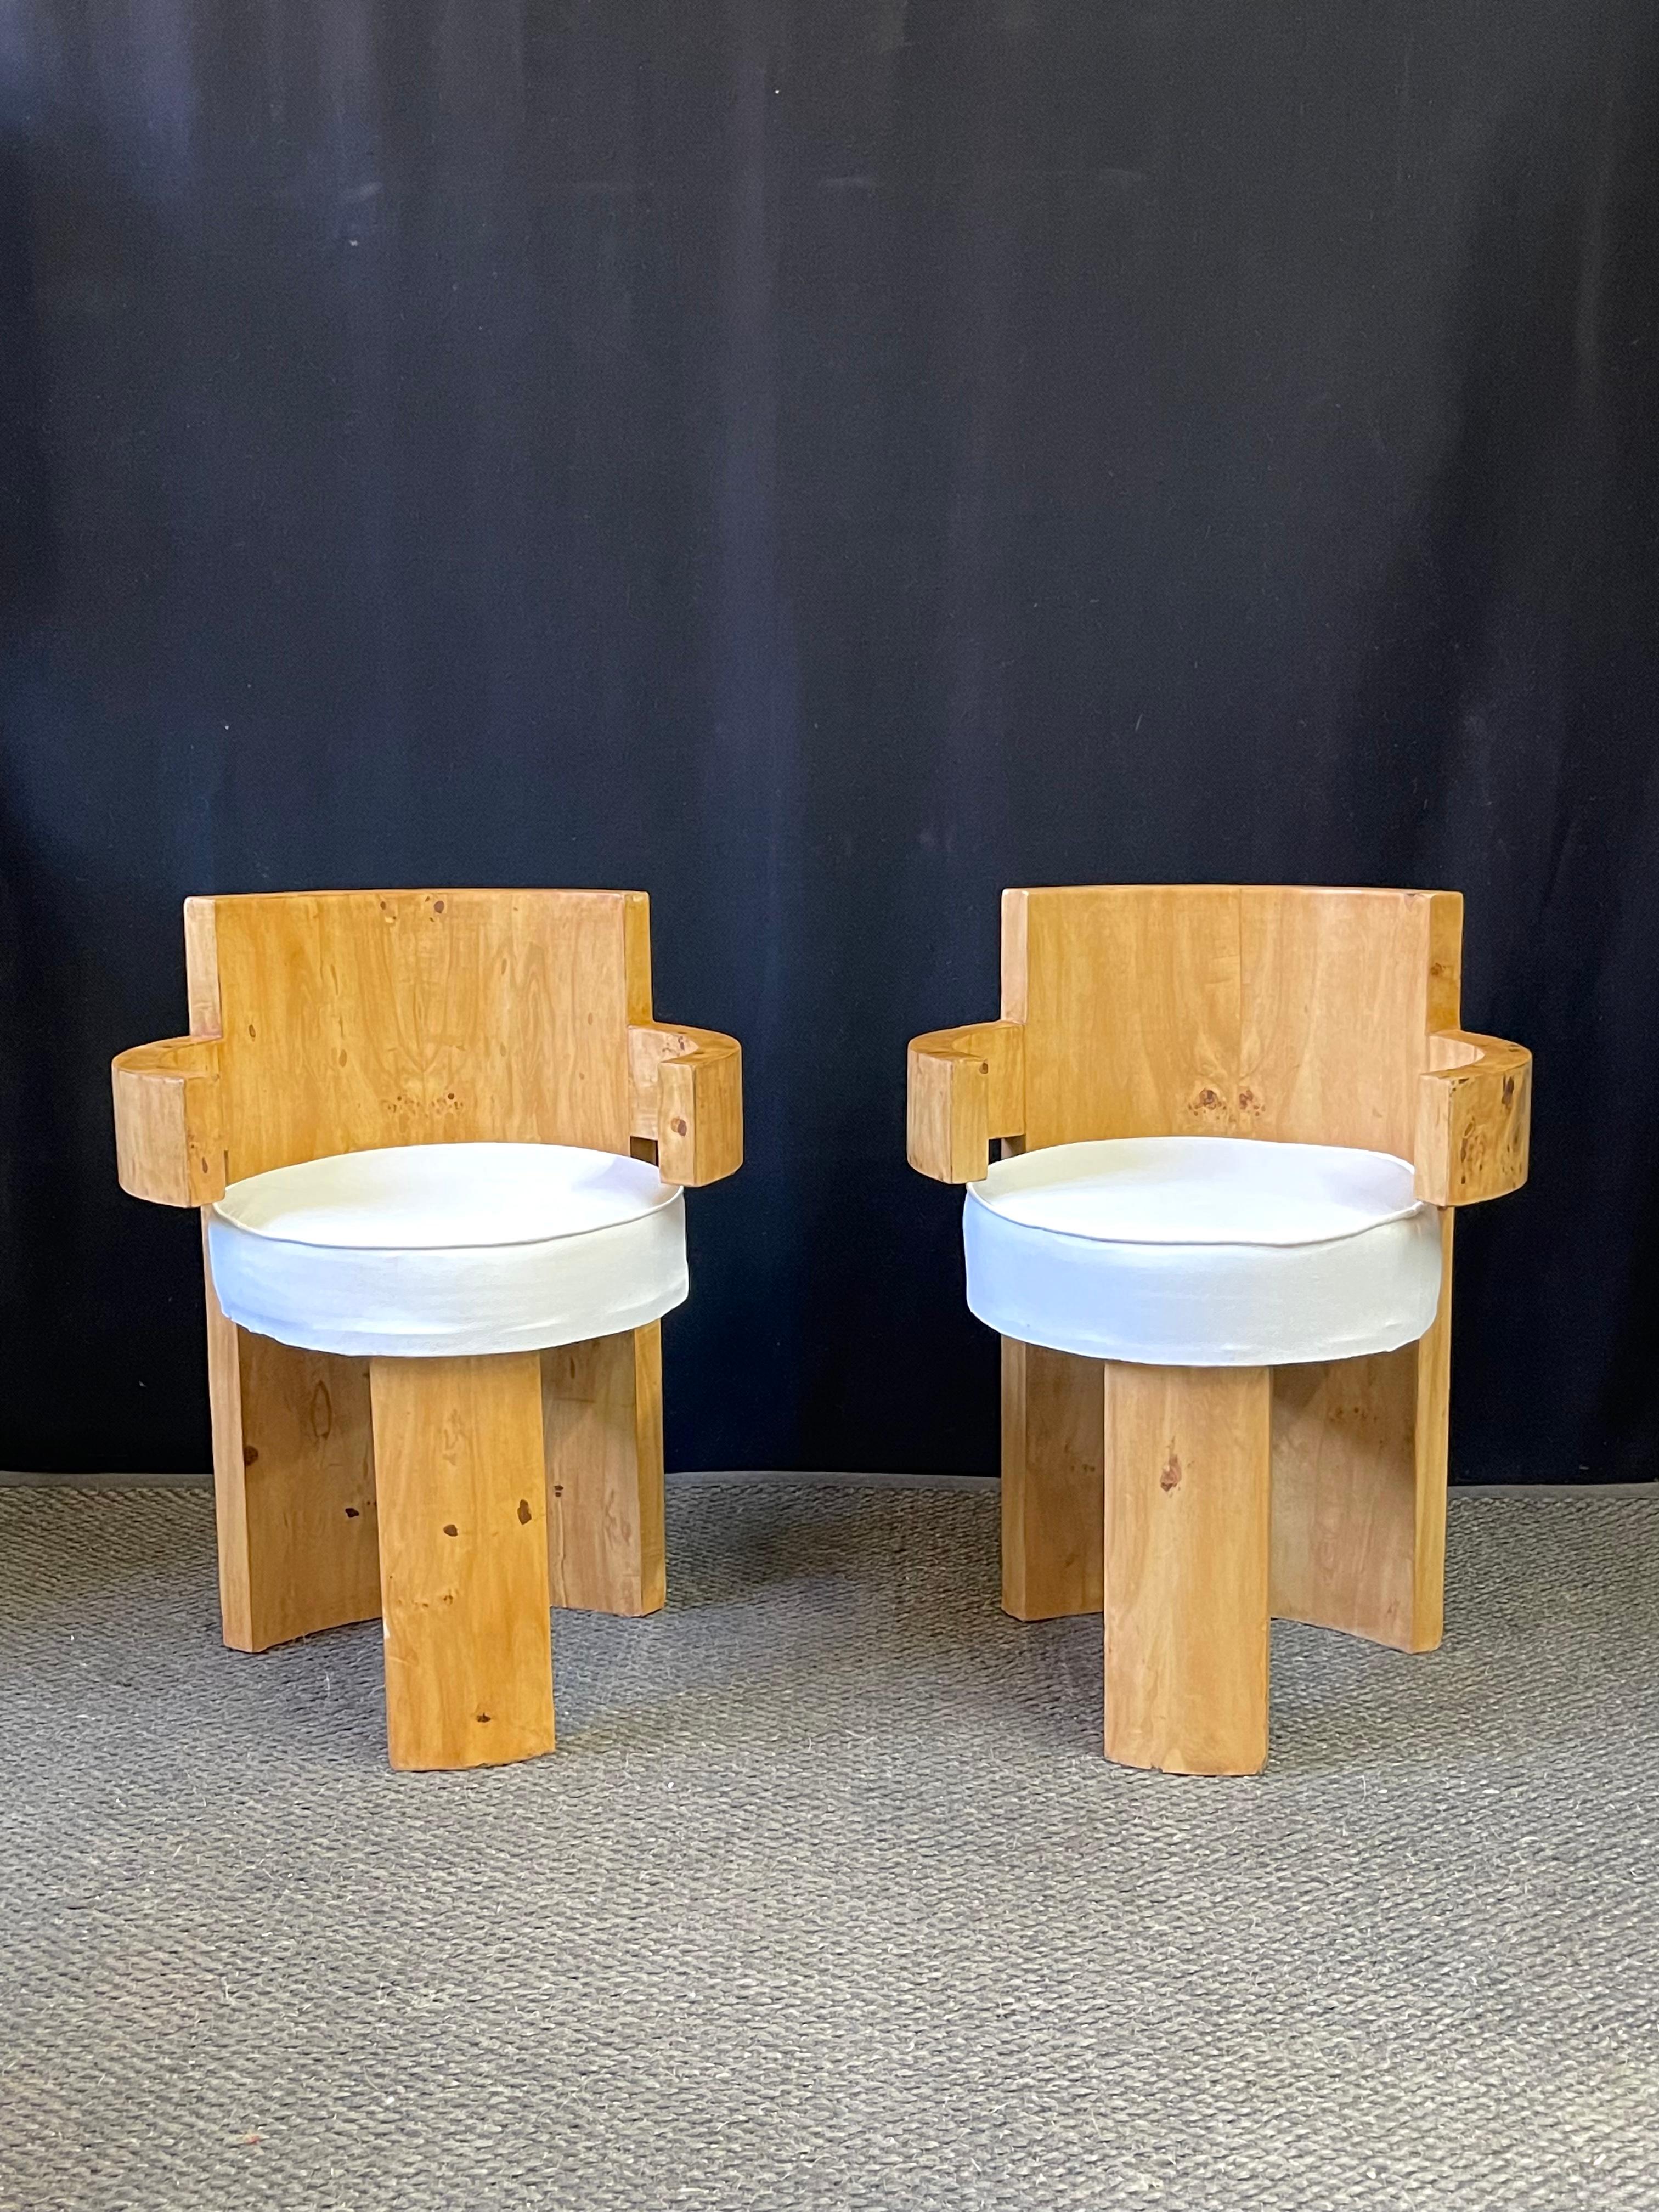 Pair of petite French Postmodern accent chairs, each having arms in a barrel shape circling a white vinyl cushion seat. The frames are veneered in maple with one concave post as the chair's backrest and terminating into the rear foot.
The